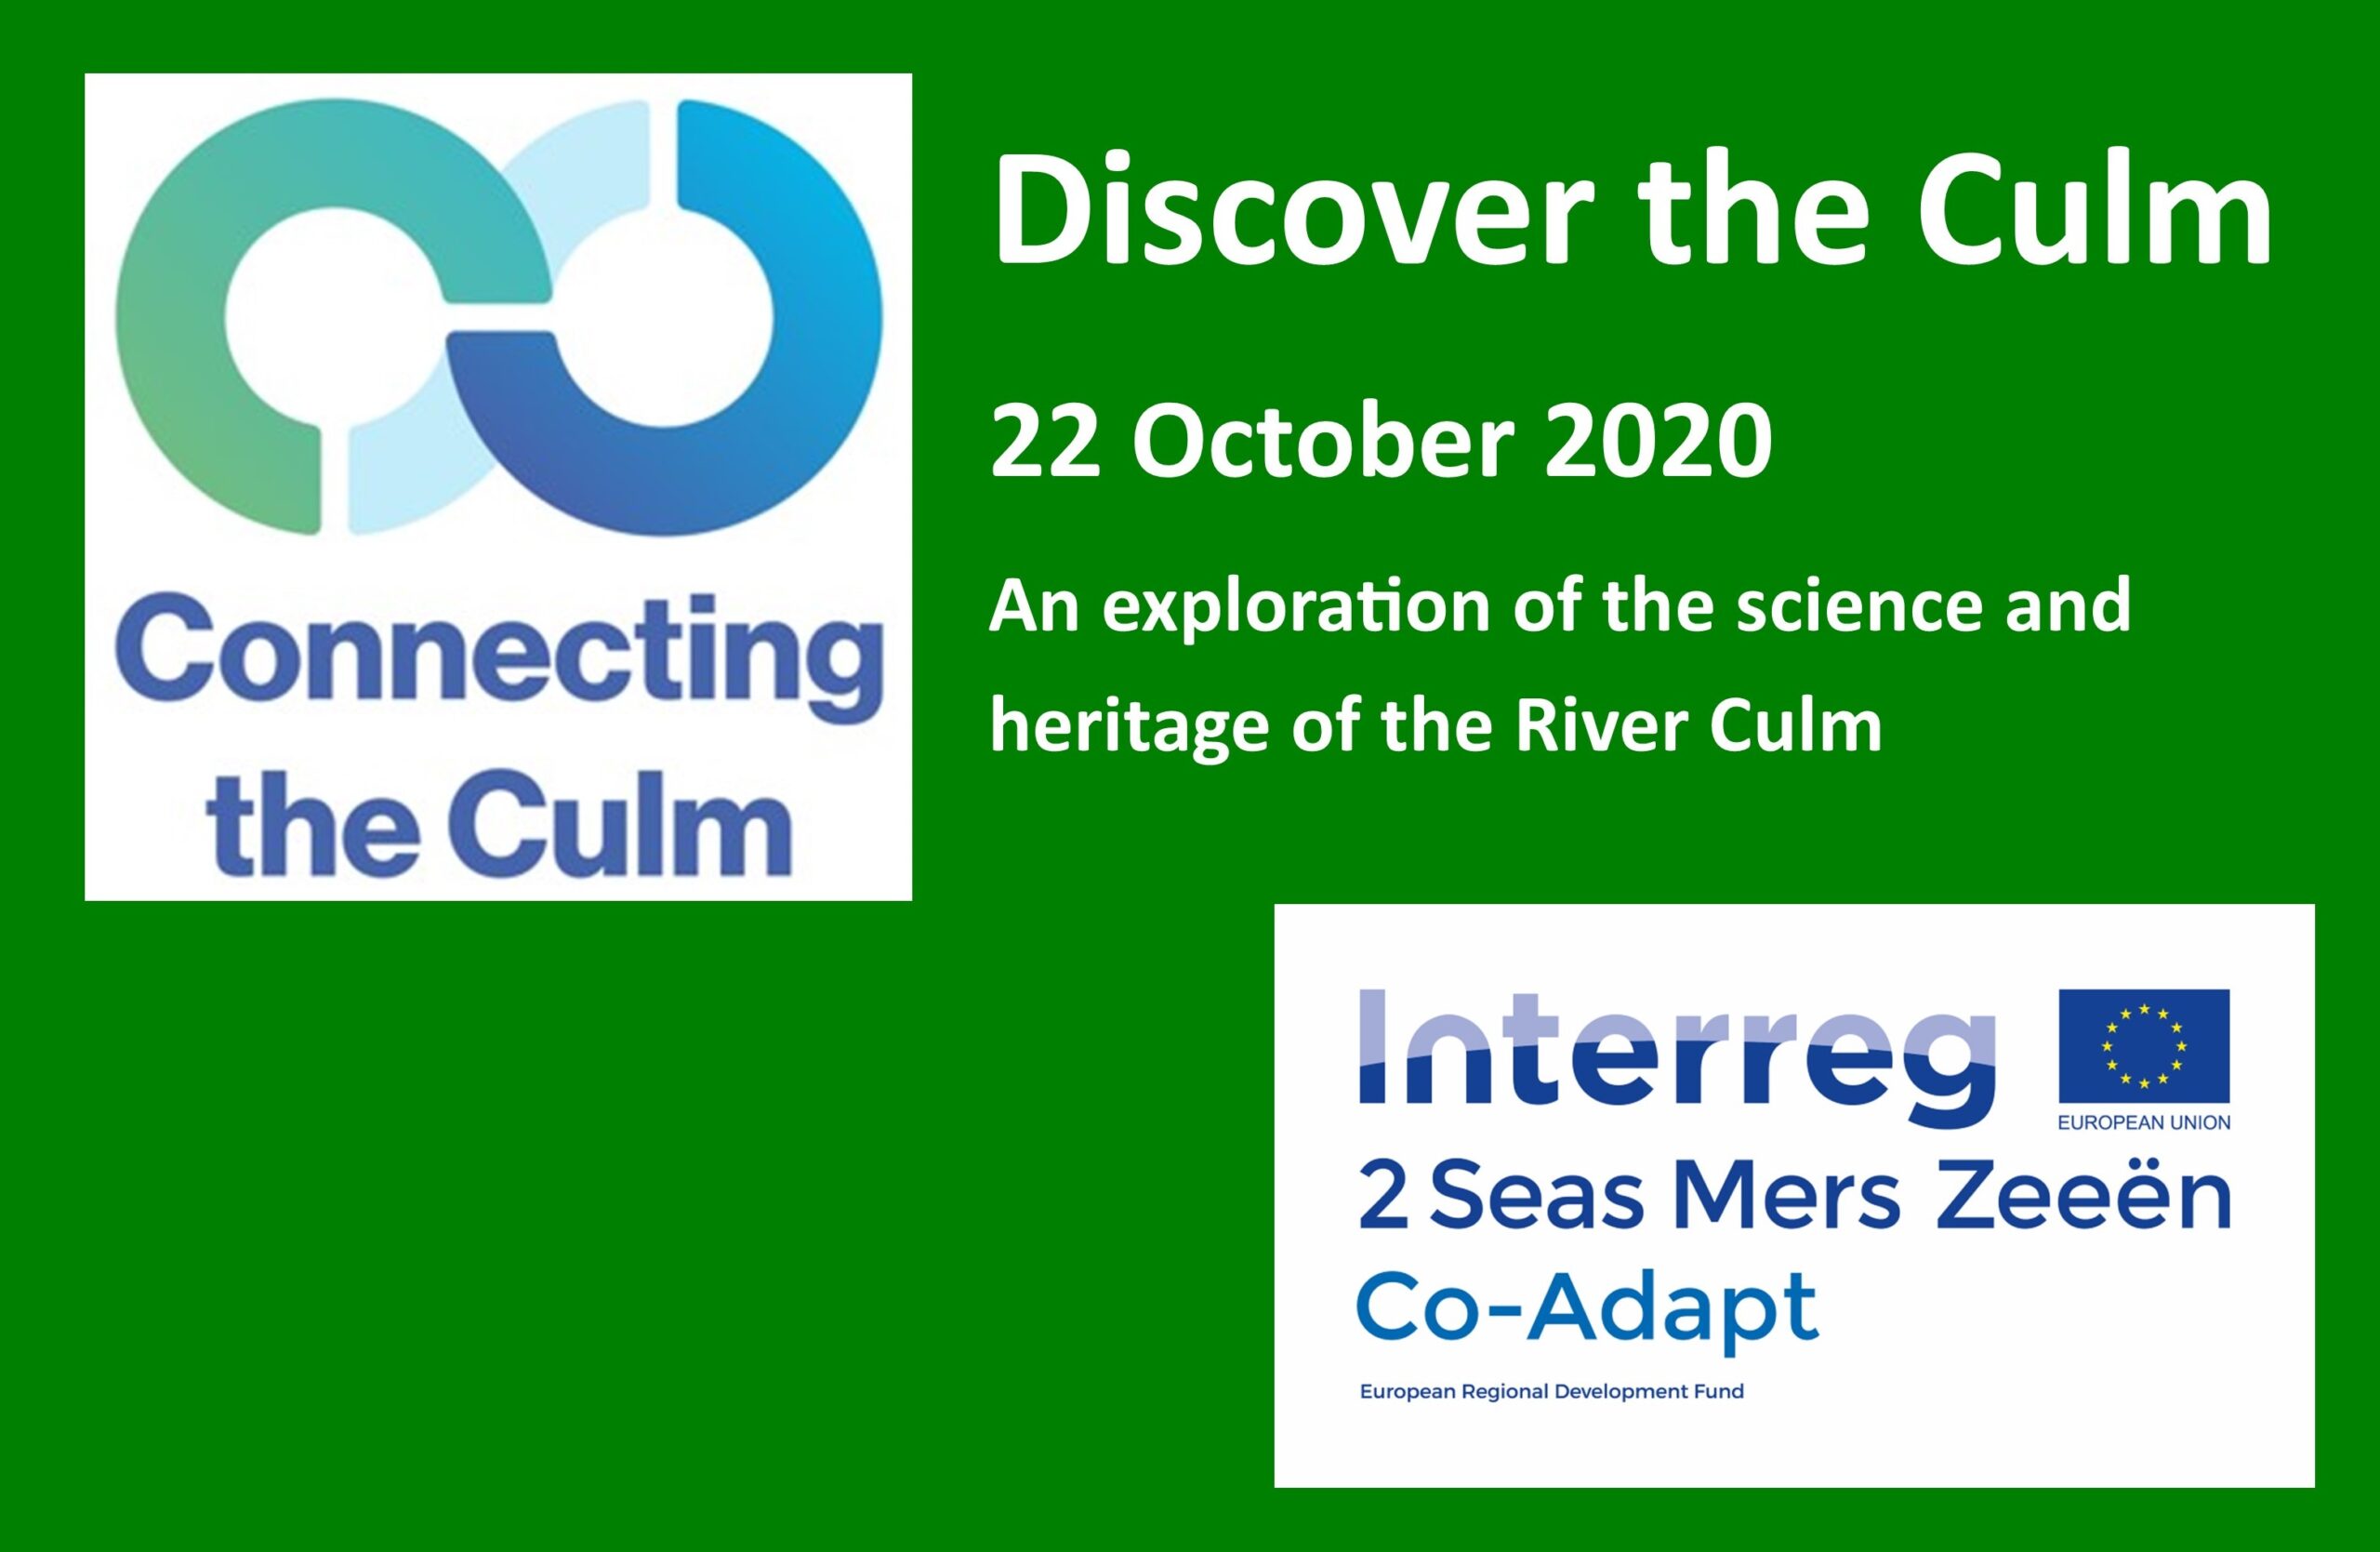 Discover the Culm 22 October 2020 An exploration of the science and heritage of the River Culm